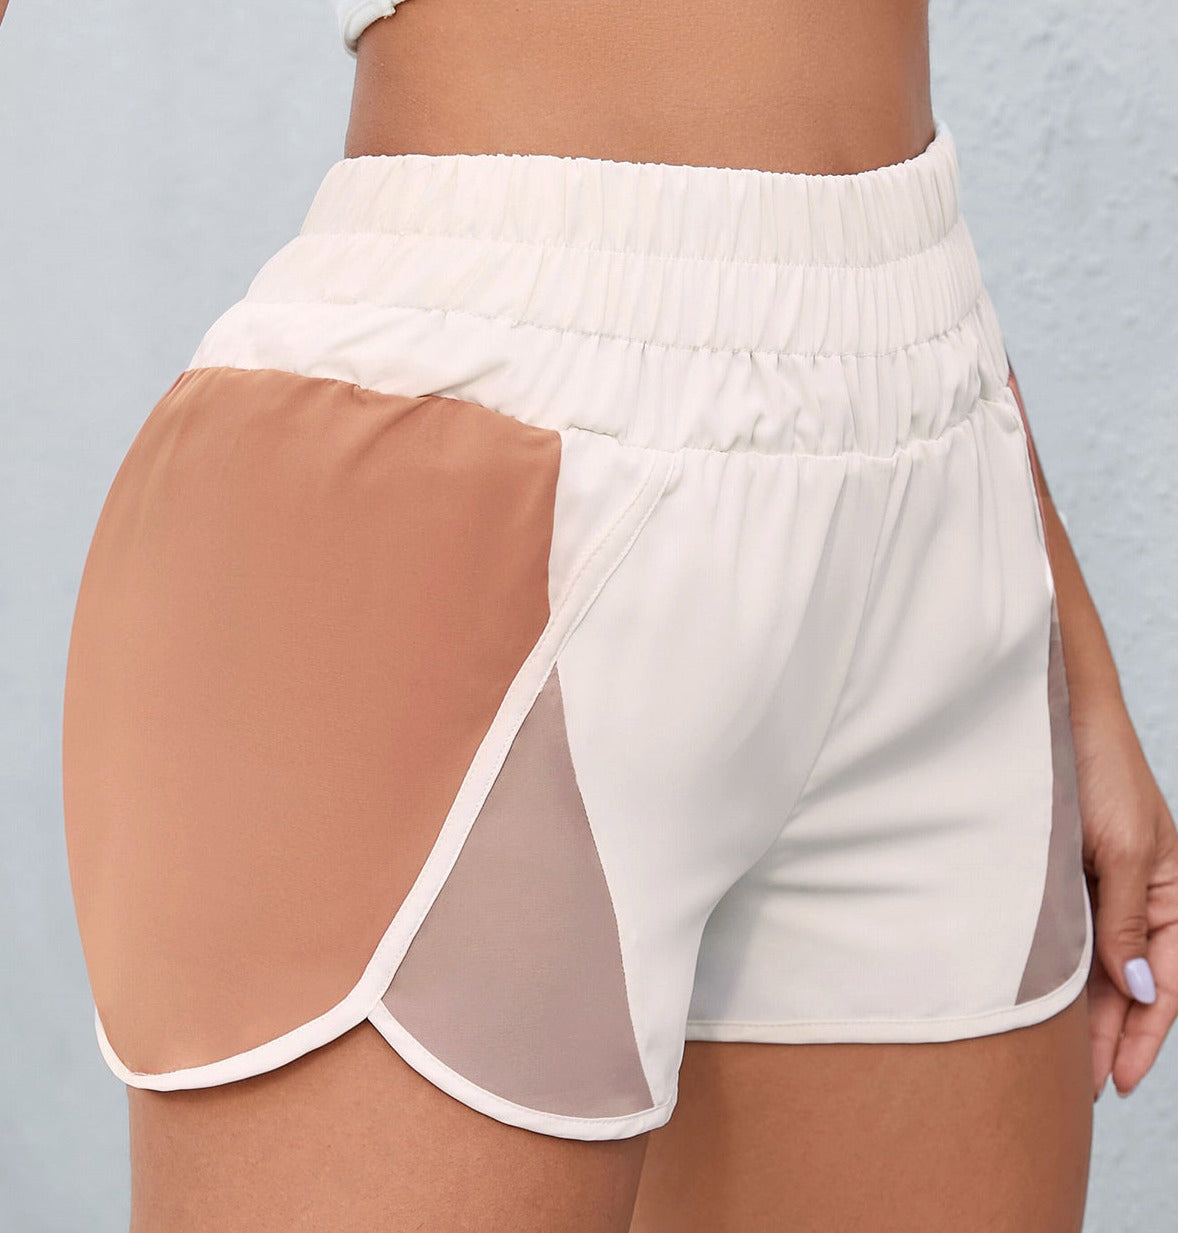 Chic Color Block Shorts with a wide waistband for ultimate comfort and style. Perfect for casual or active wear.